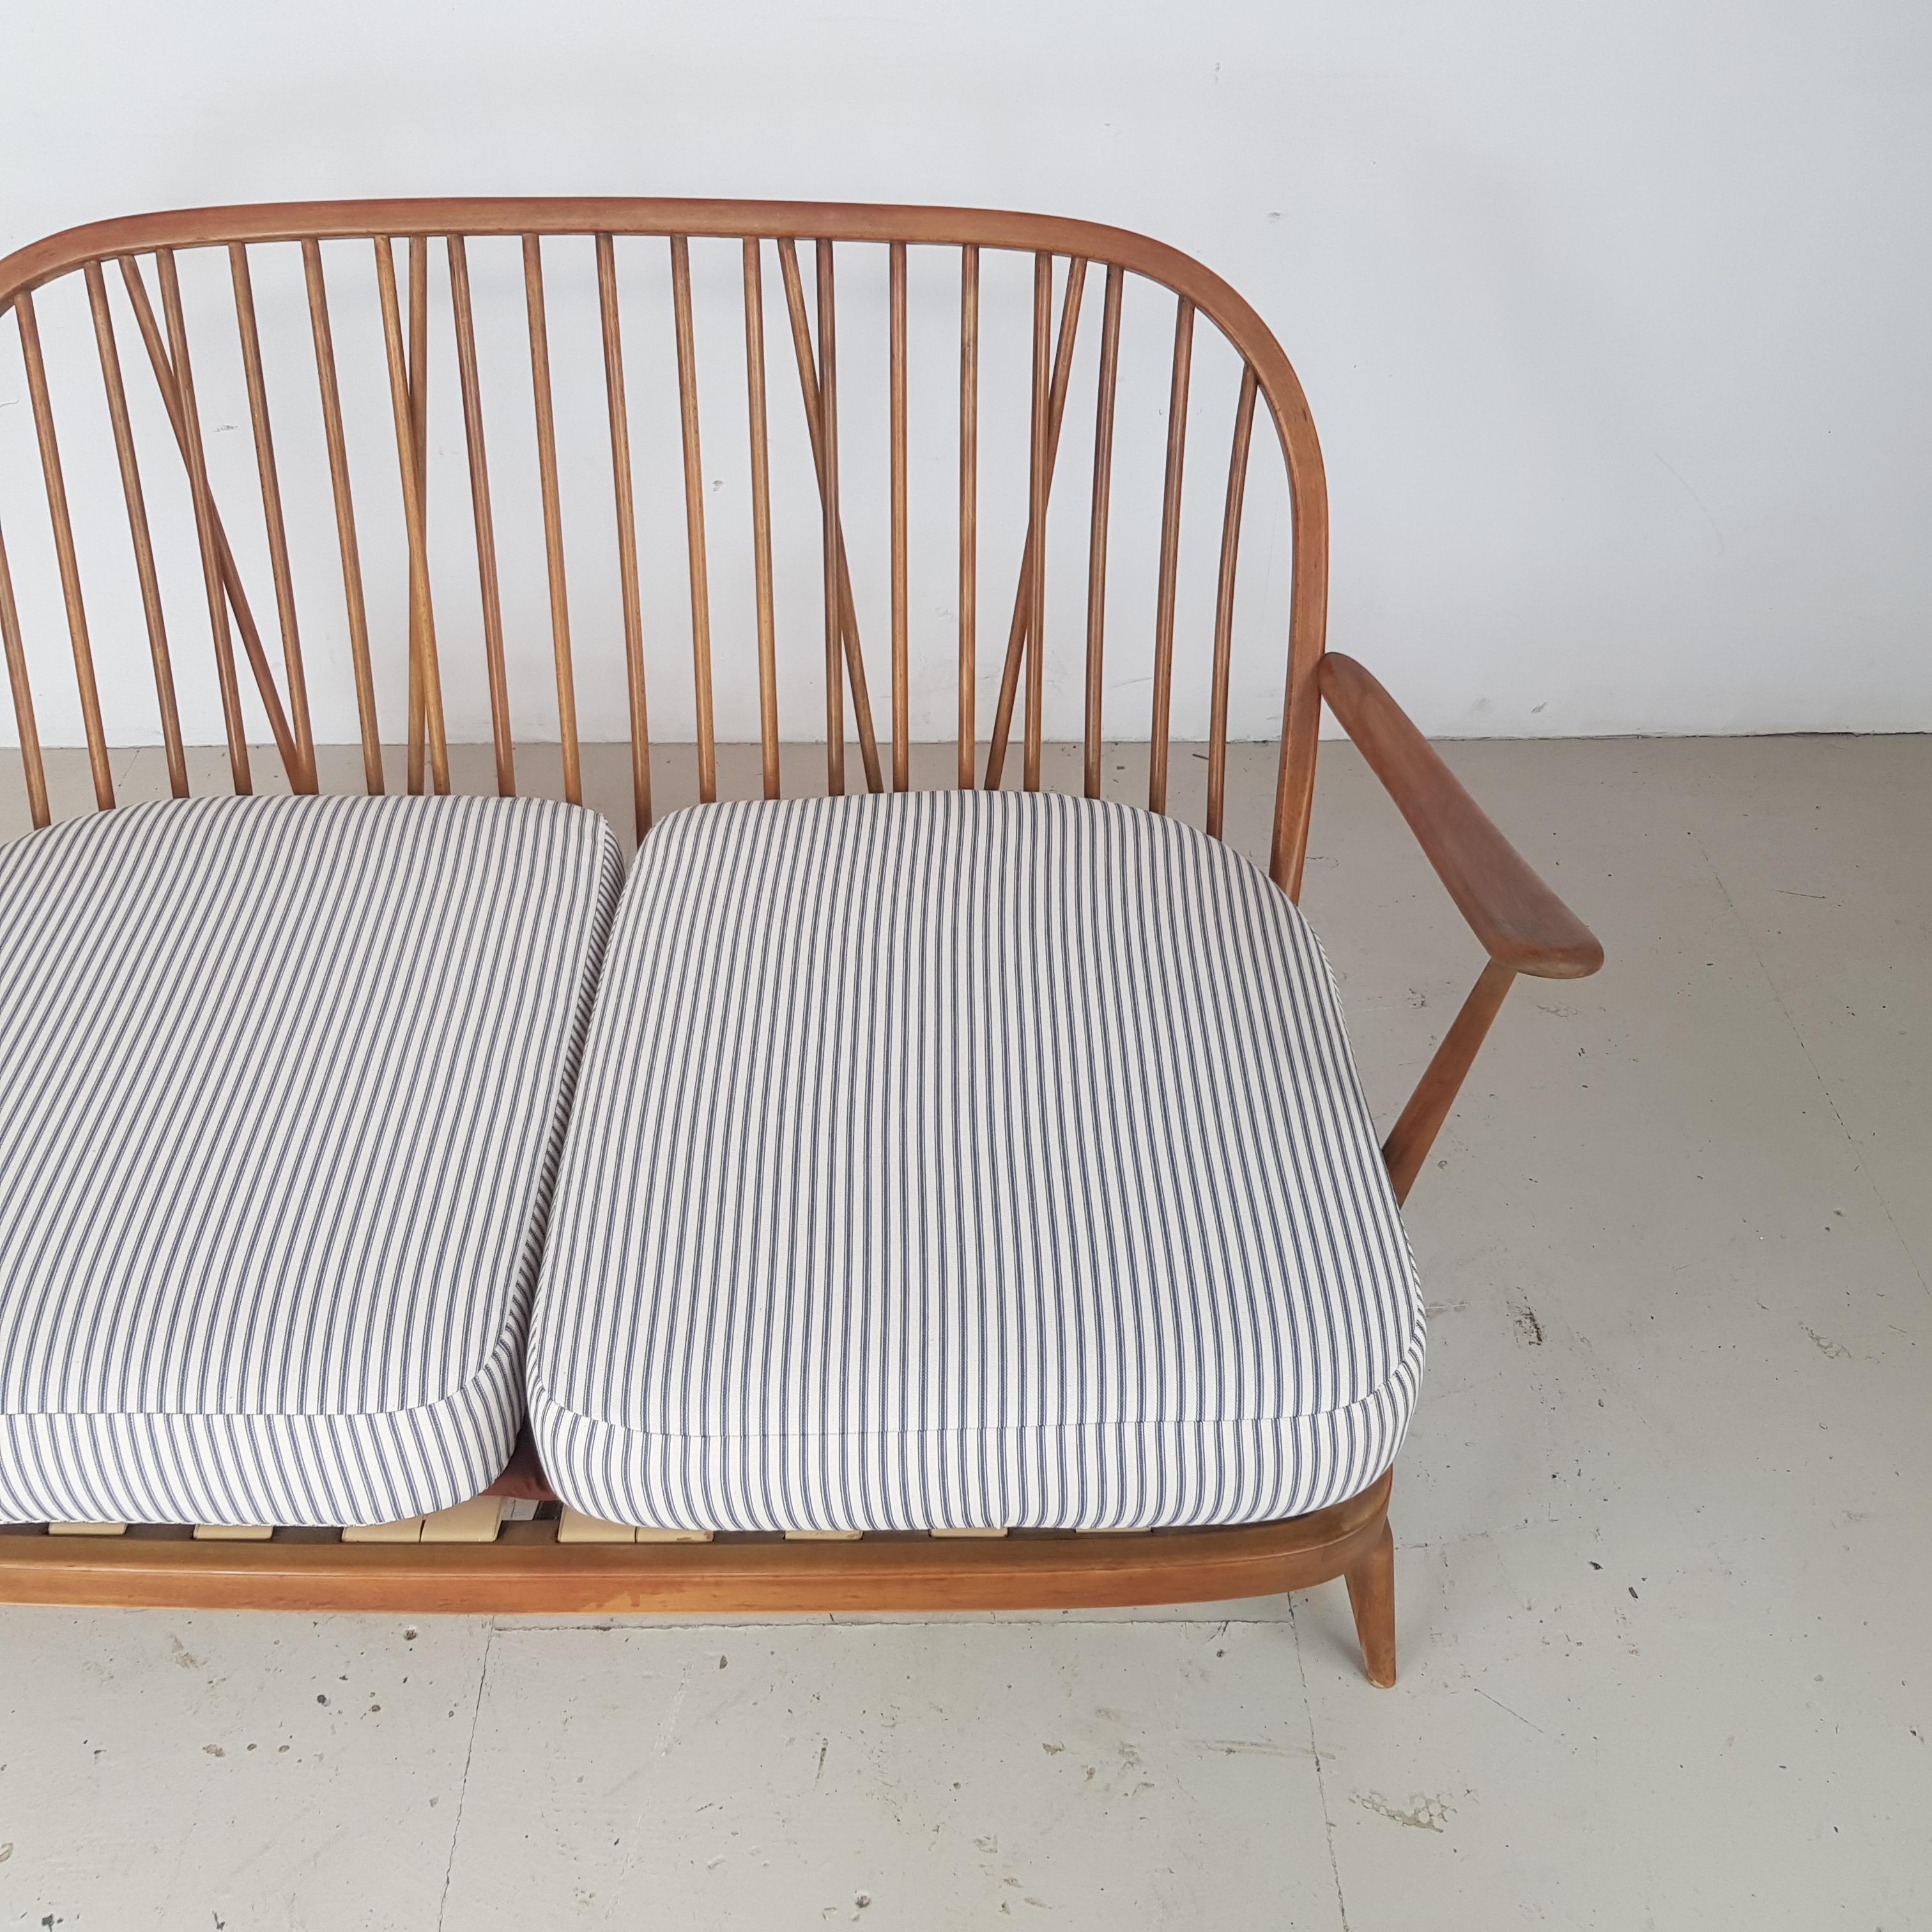 English Refurbished Vintage Ercol Windsor Two-Seat Sofa Upholstered in French Ticking